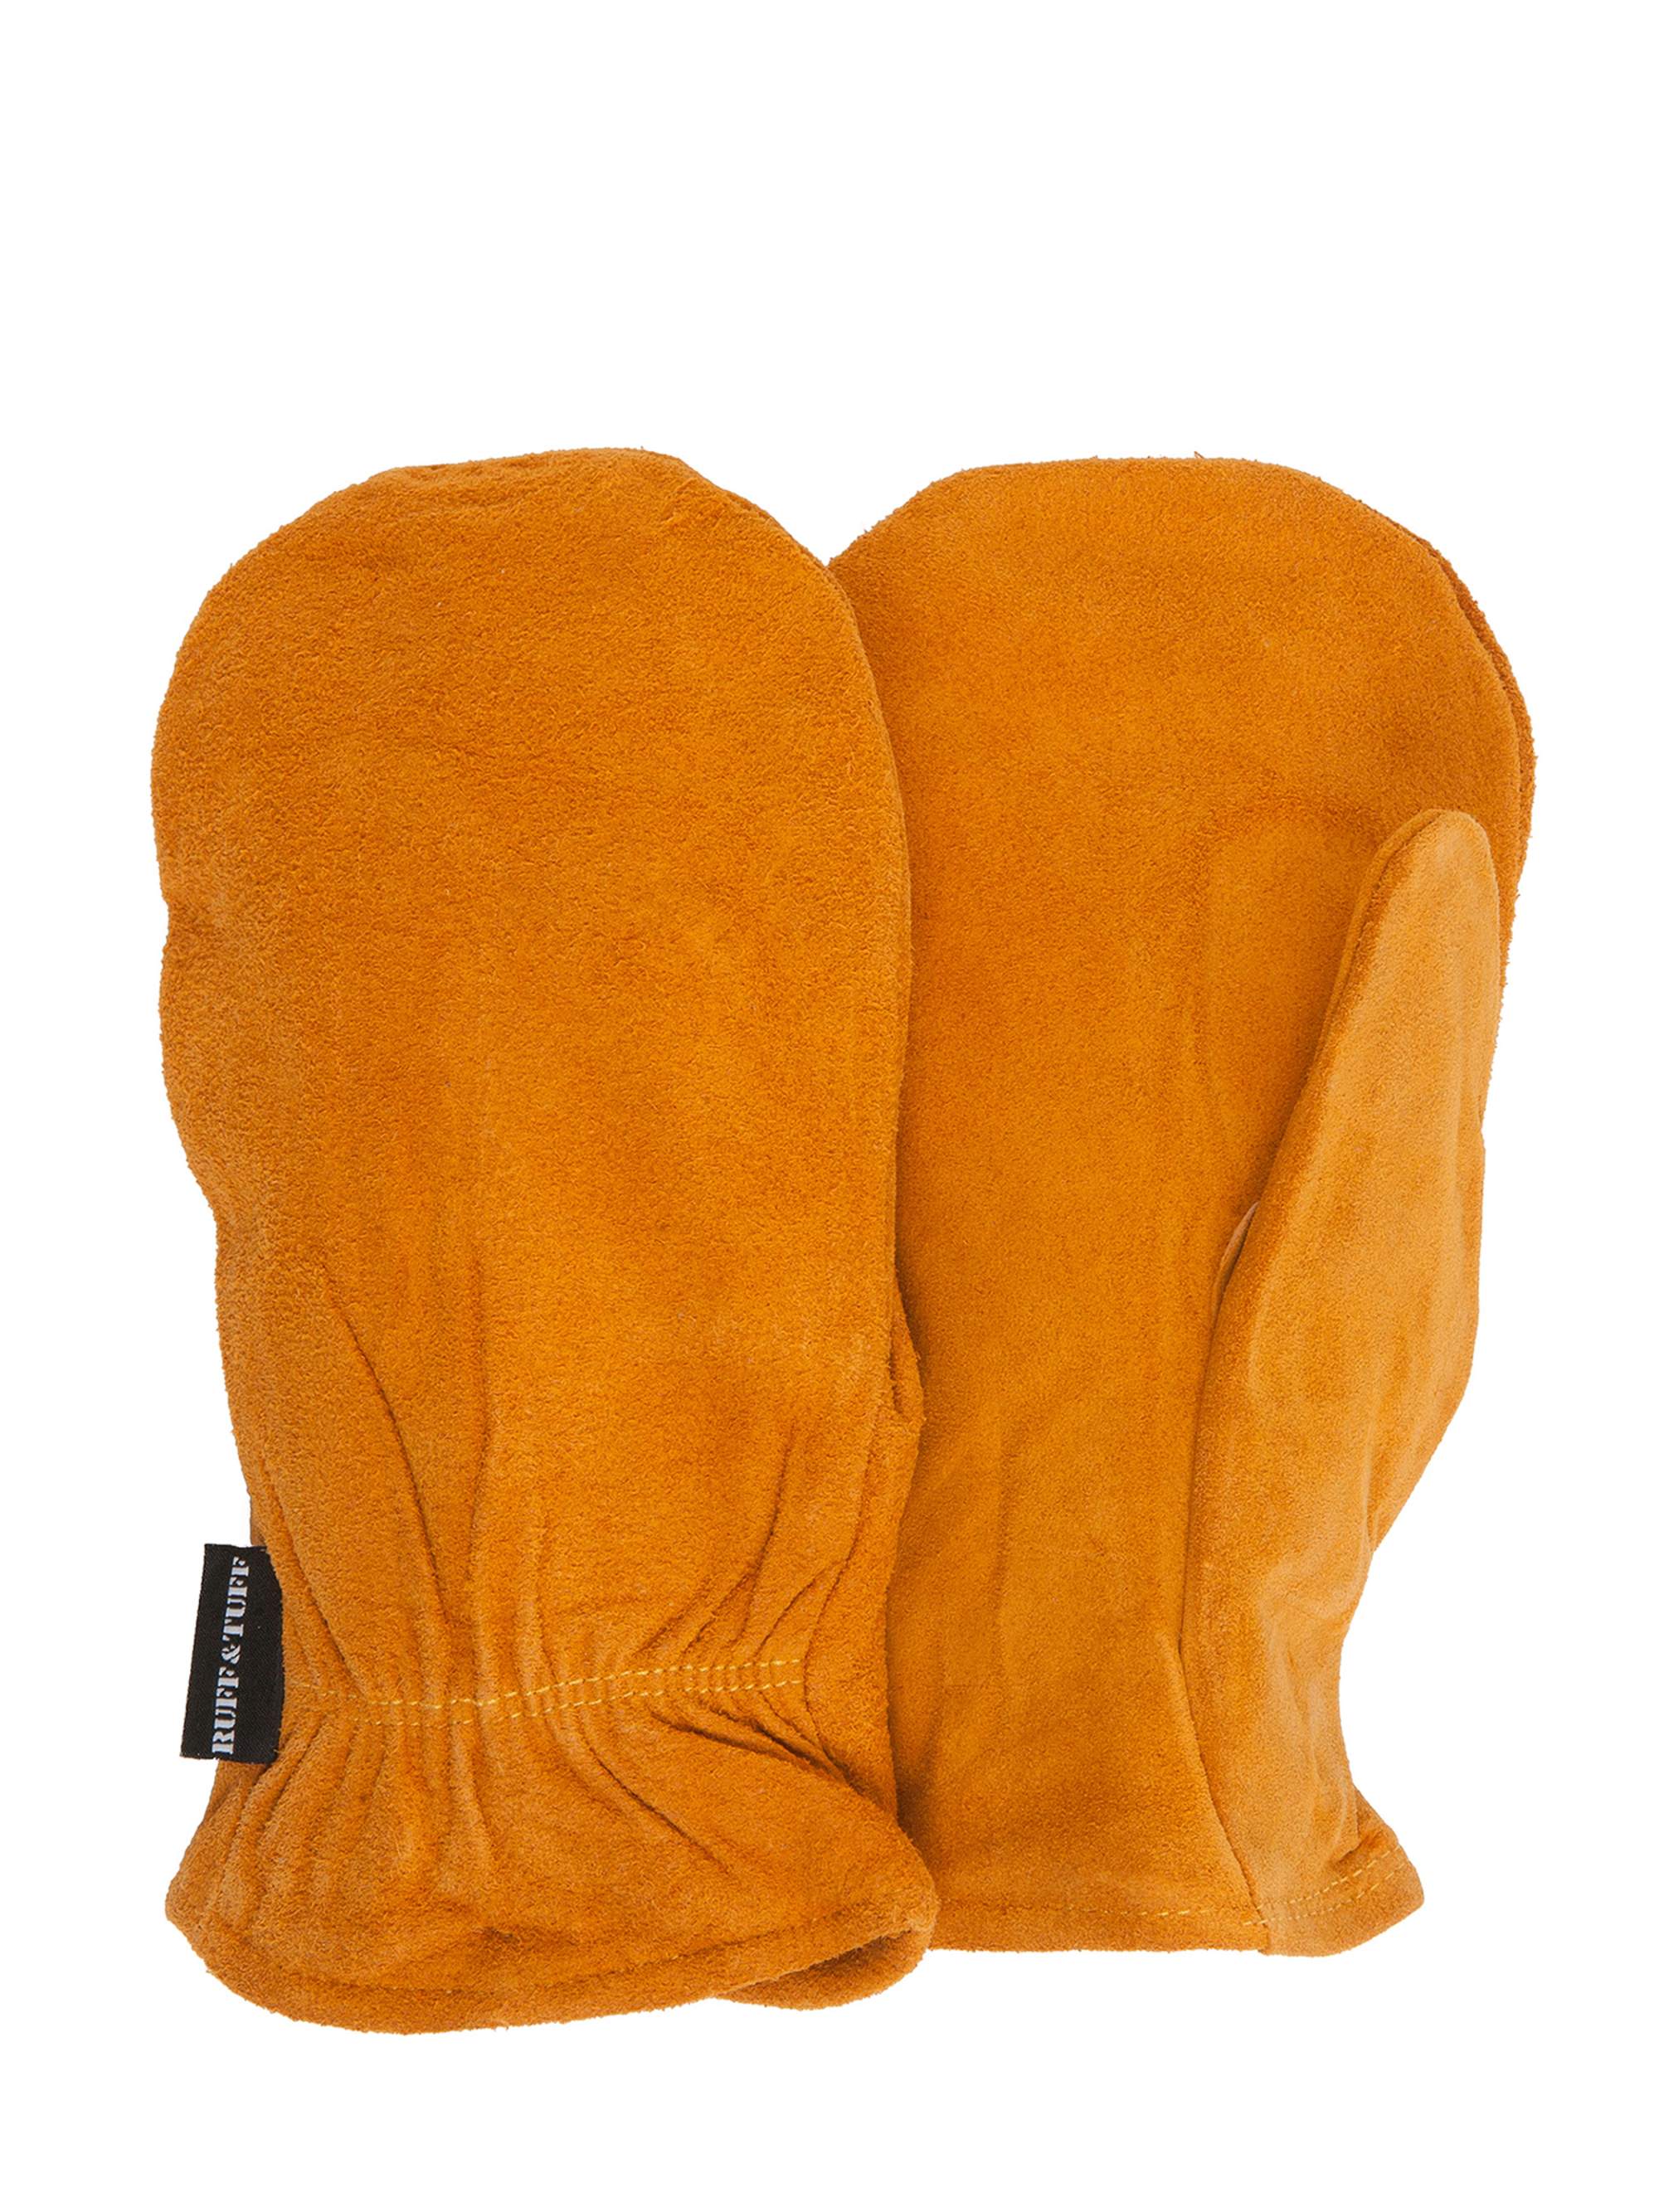 QuietWear Split-Leather Thinsulate Mittens - image 1 of 1